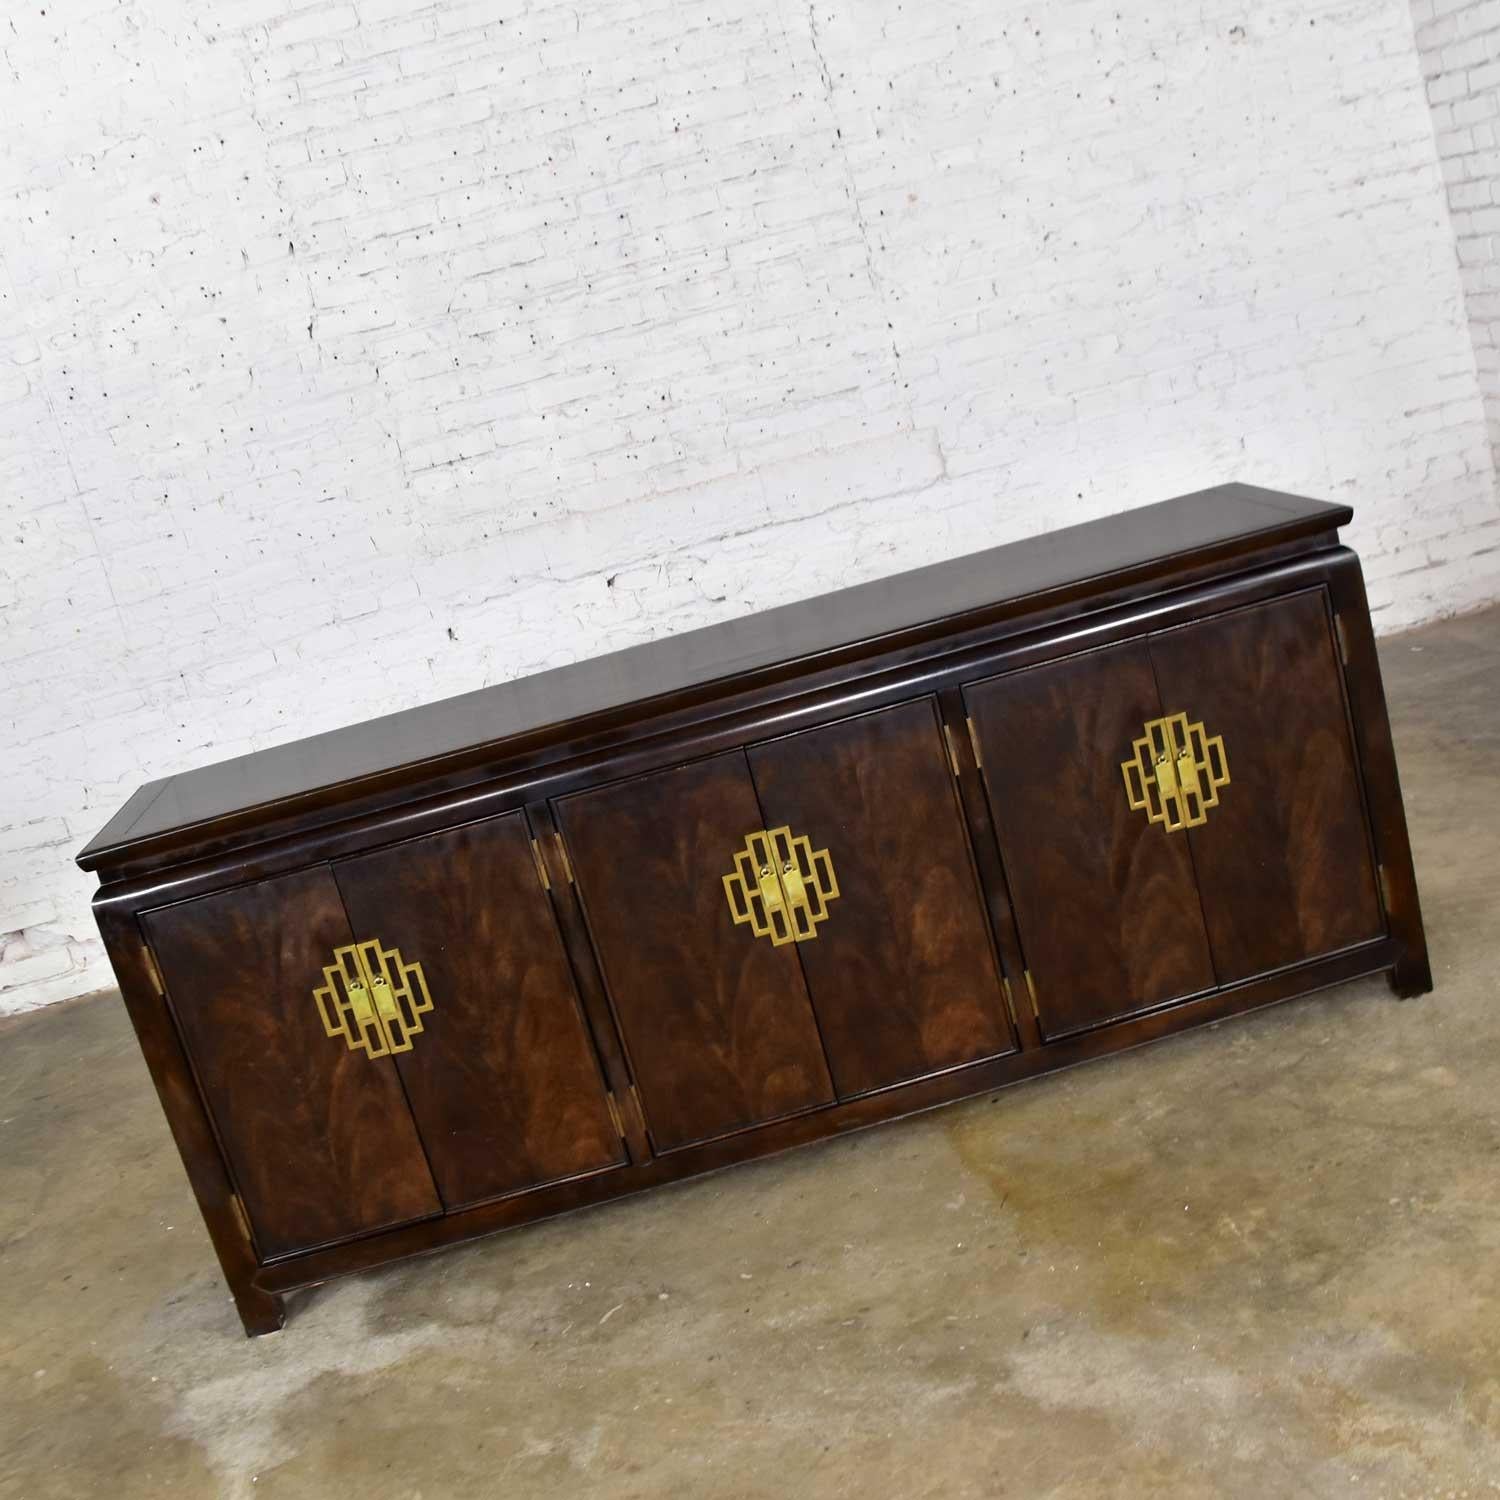 Handsome Hollywood Regency chinoiserie buffet or credenza designed by Raymond K. Sobota for his Chin Hua Collection for Century Furniture. Comprised of dark ebonized ash with burl wood and brass accents and pulls. This credenza is in wonderful